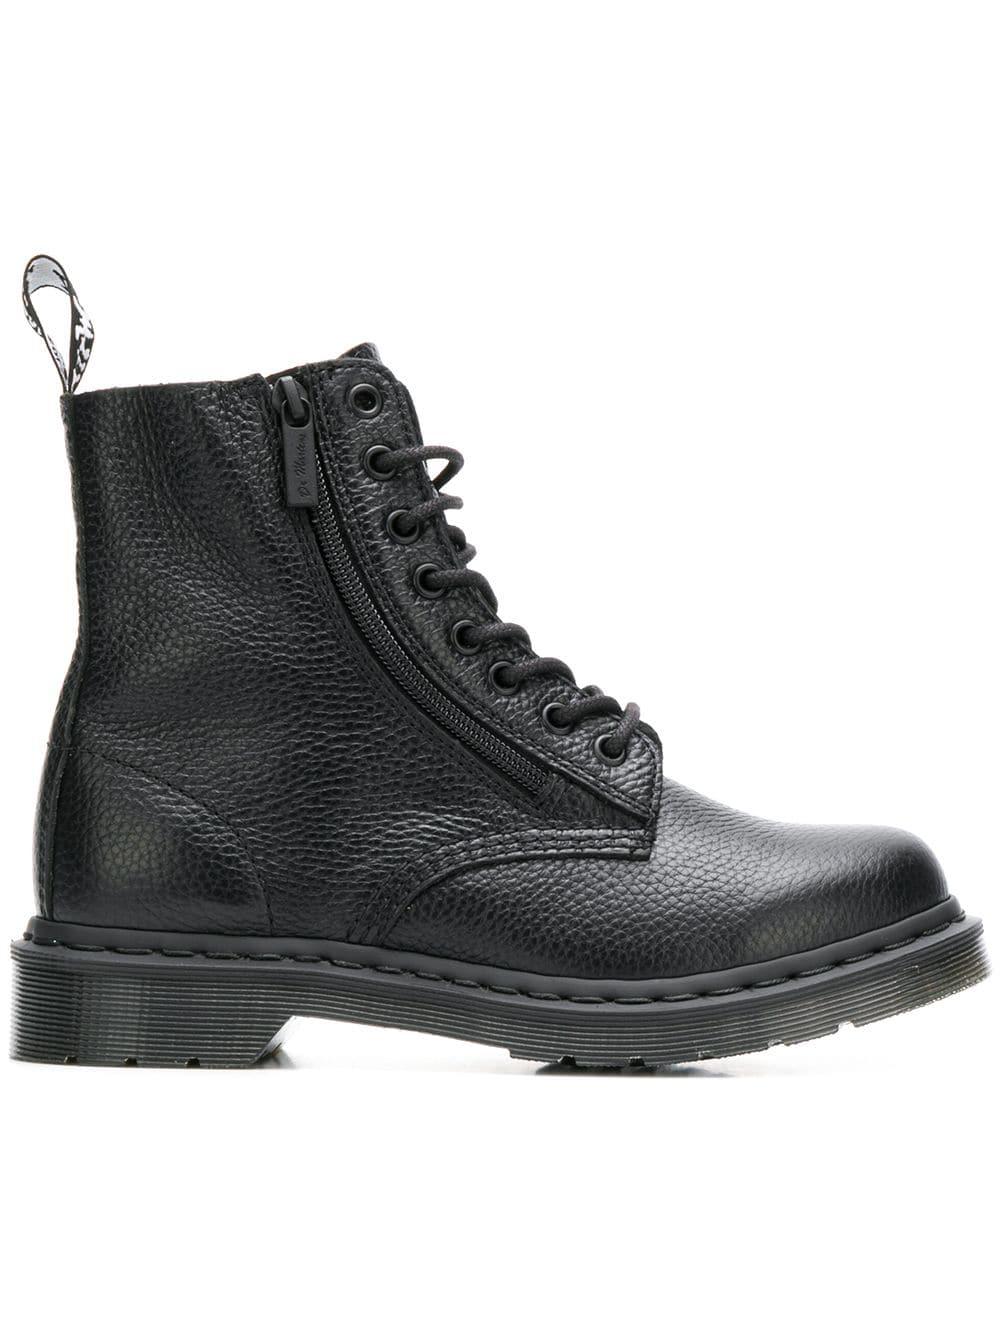 Dr. Martens Leather 1460 Pascal Side Zip Boots in Black | Lyst